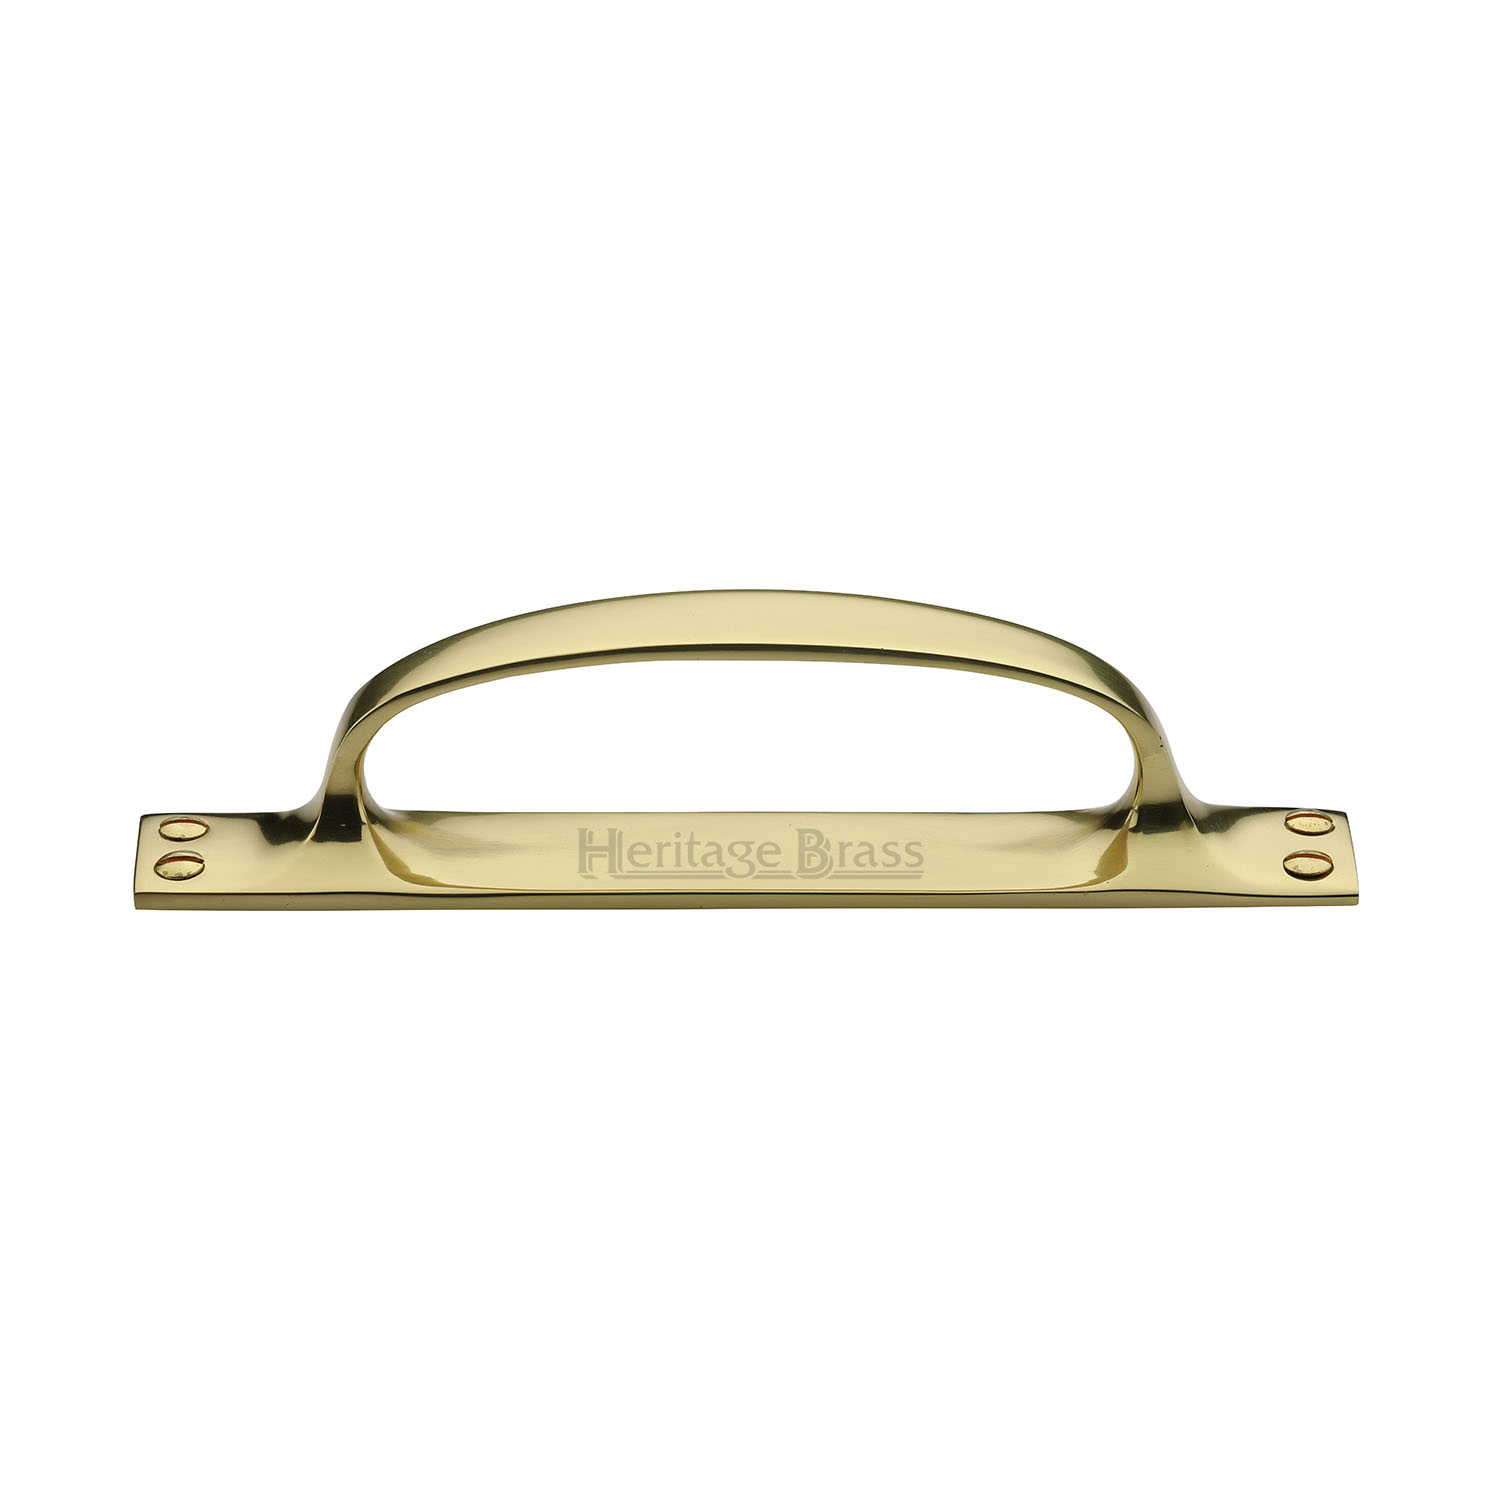 Heritage Brass Pull Handle on Plate